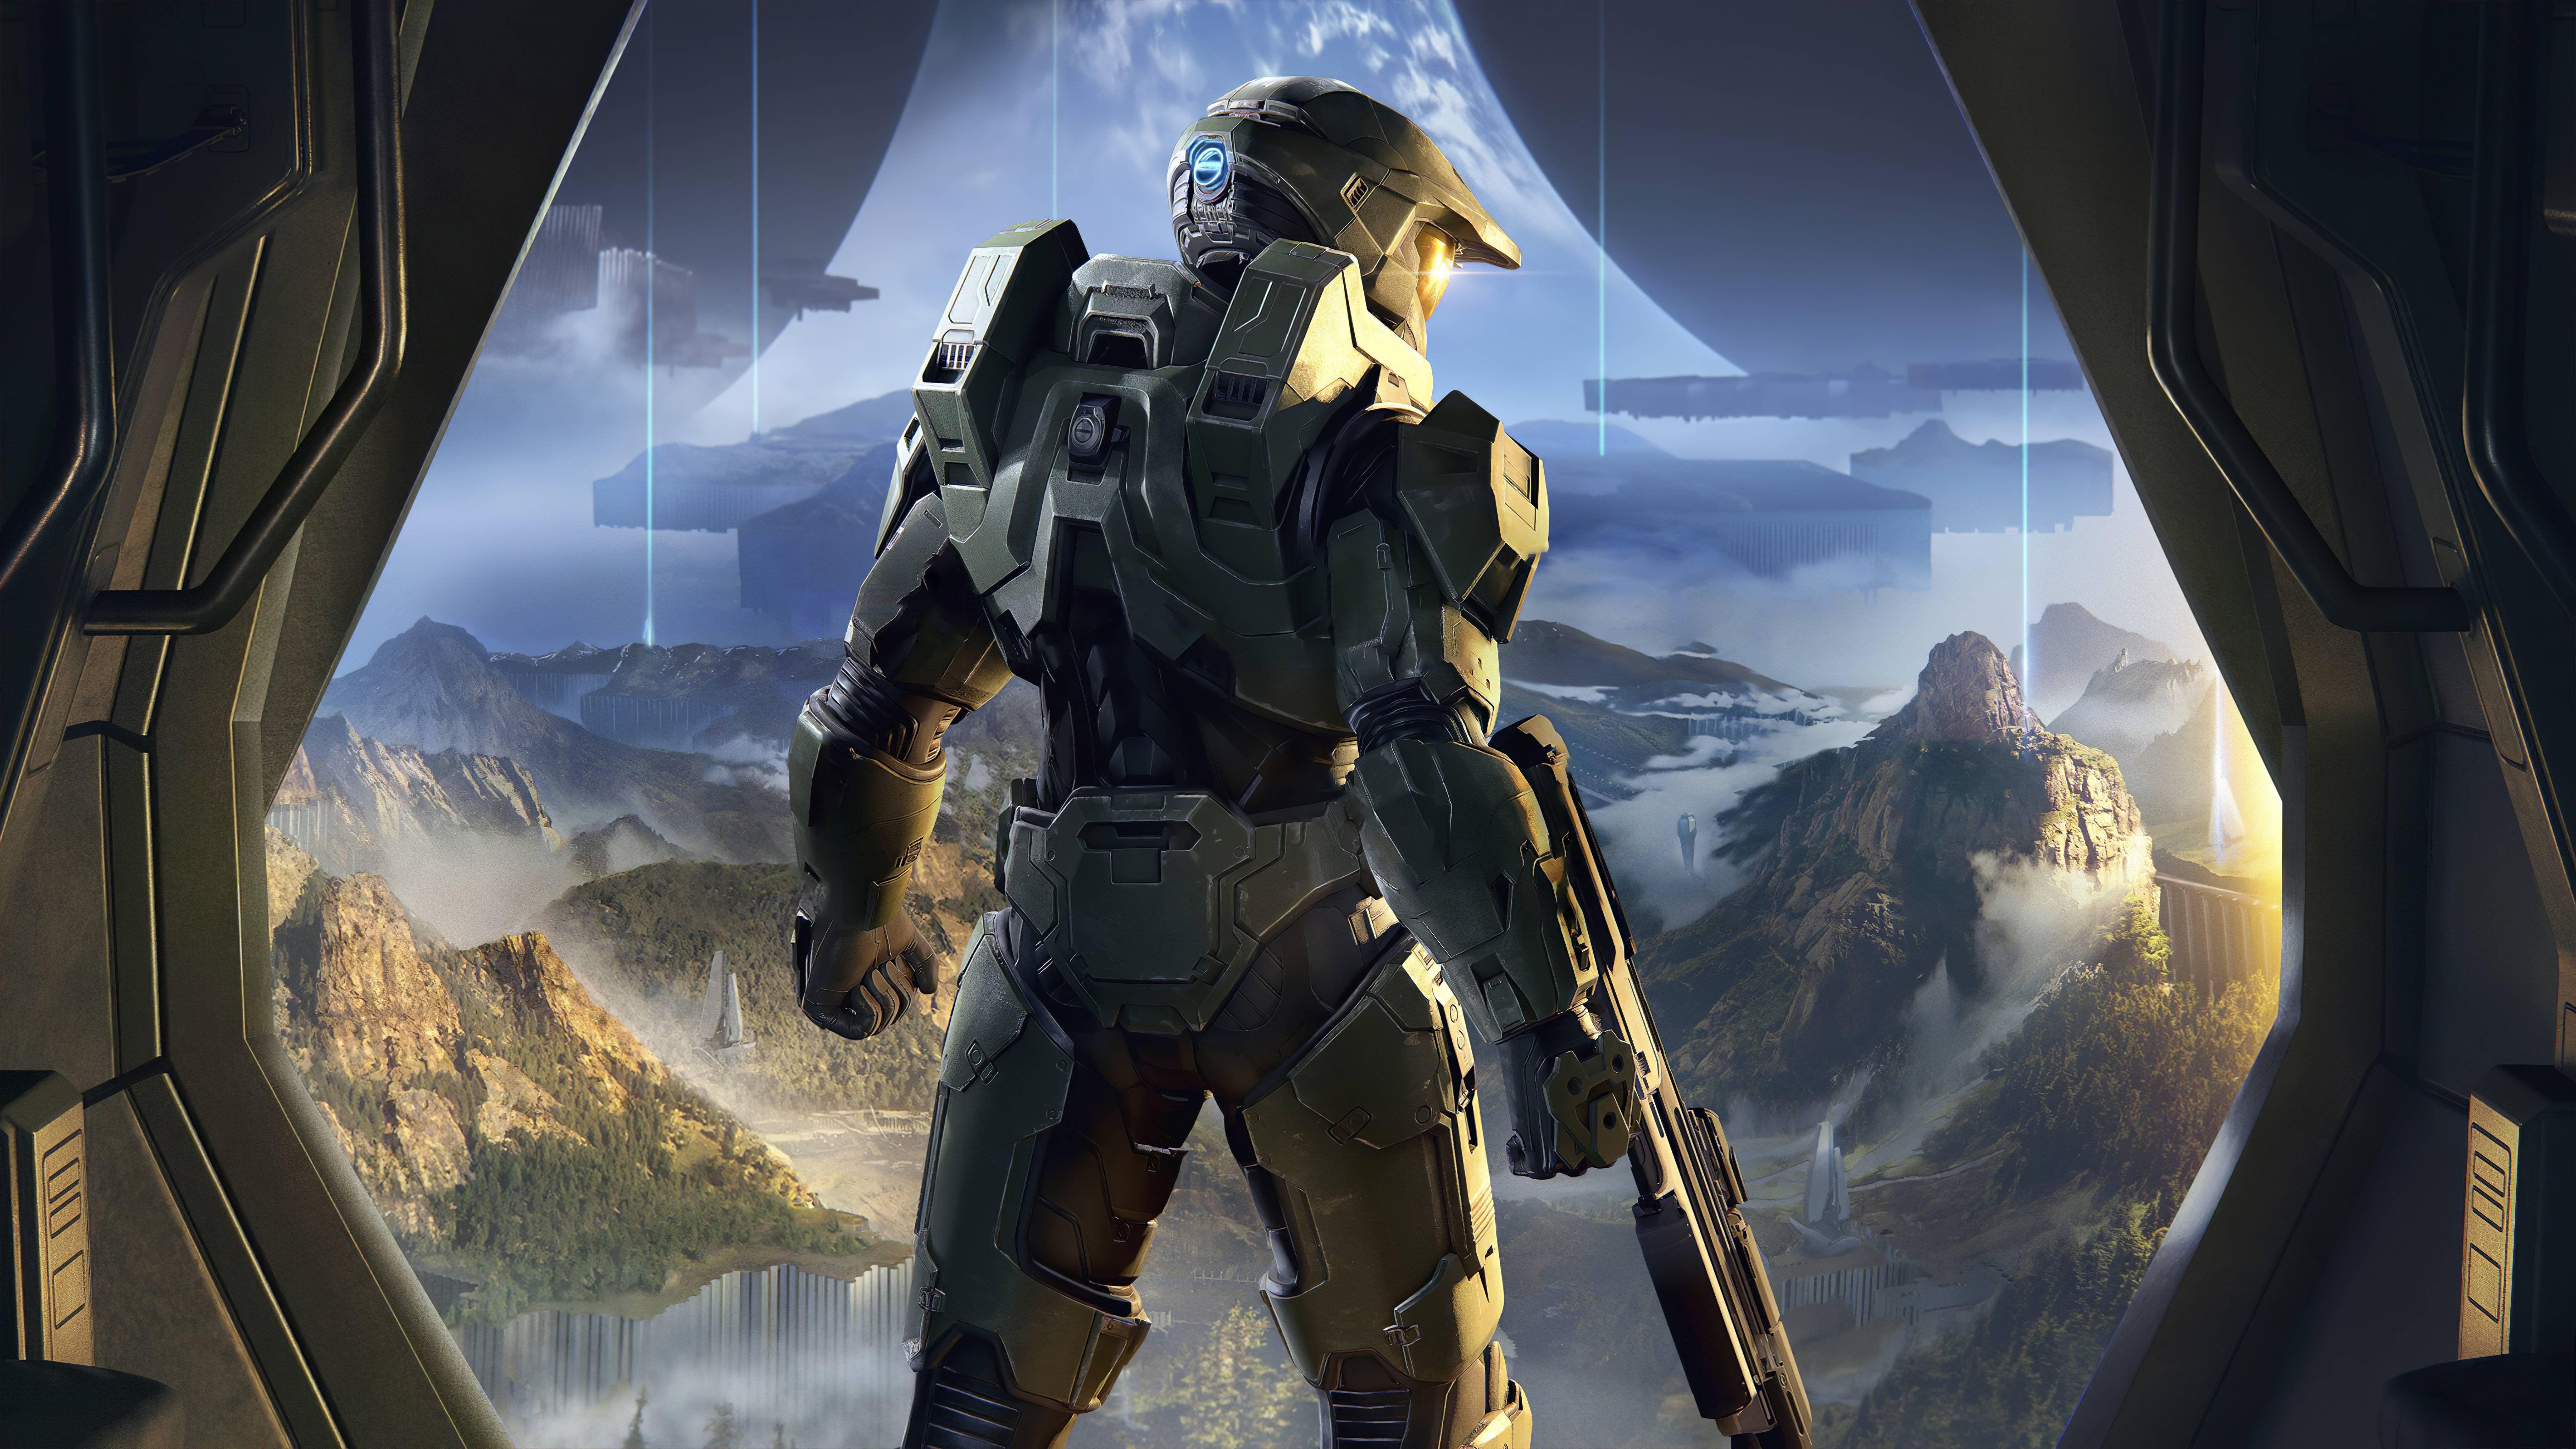 8192 x 4608 · jpeg - I went ahead and AI-upscaled the new Halo Infinite poster and edited ...